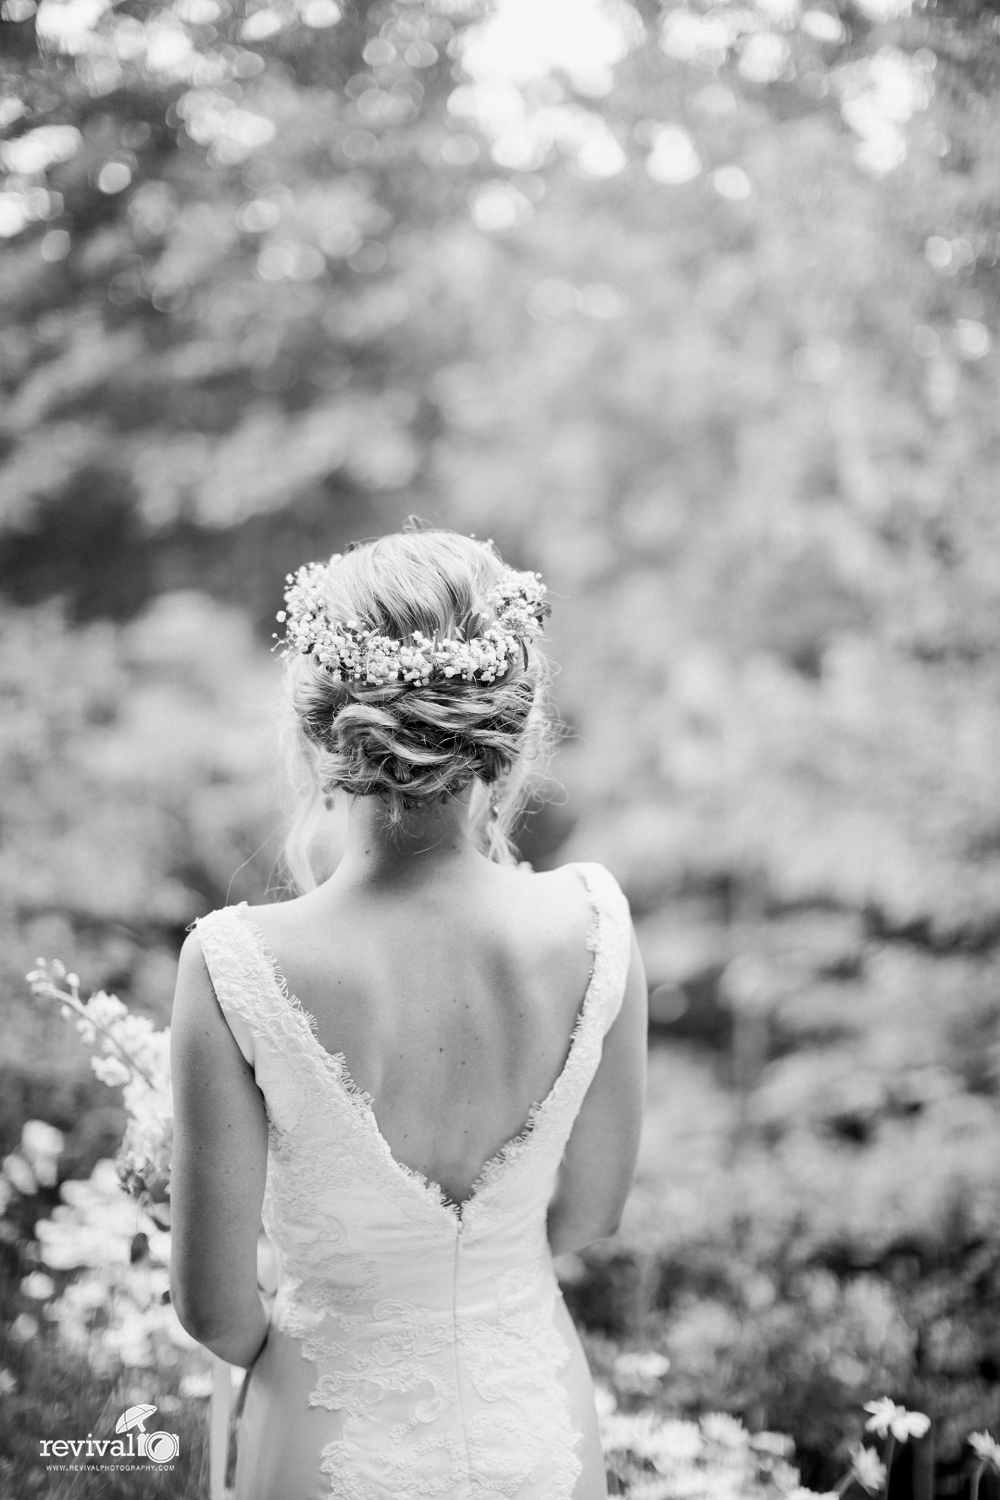 Heidi + Grant: A Vintage-Rustic Inspired Destination Wedding in the ...